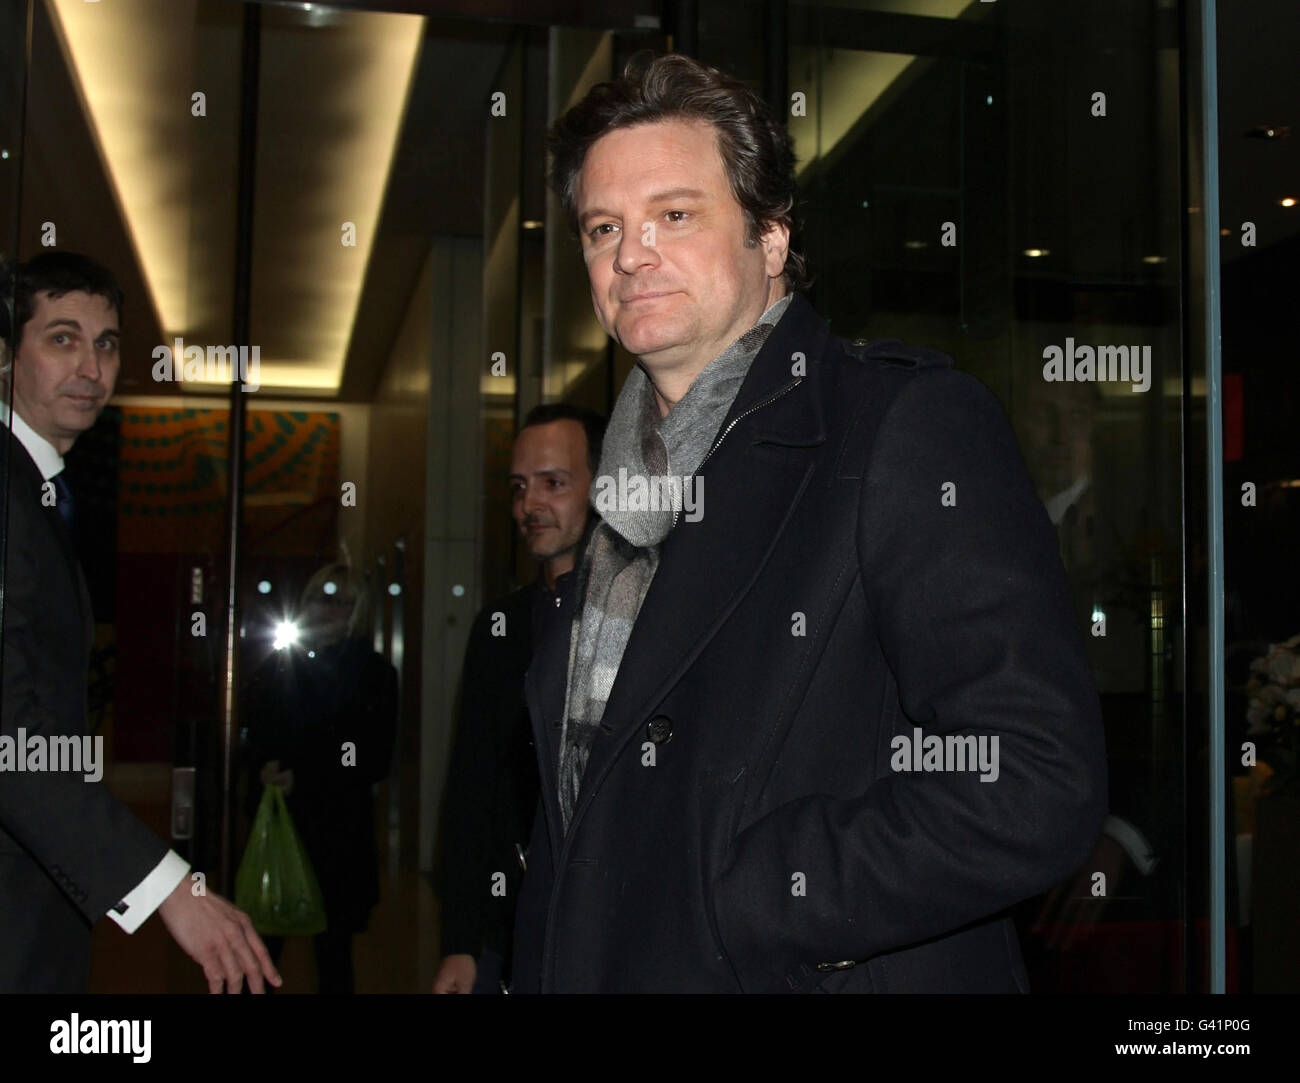 Actor Colin Firth arriving for a Meet the Filmmakers: The King's Speech' event at the Apple Store on Regent Street, central London. Stock Photo